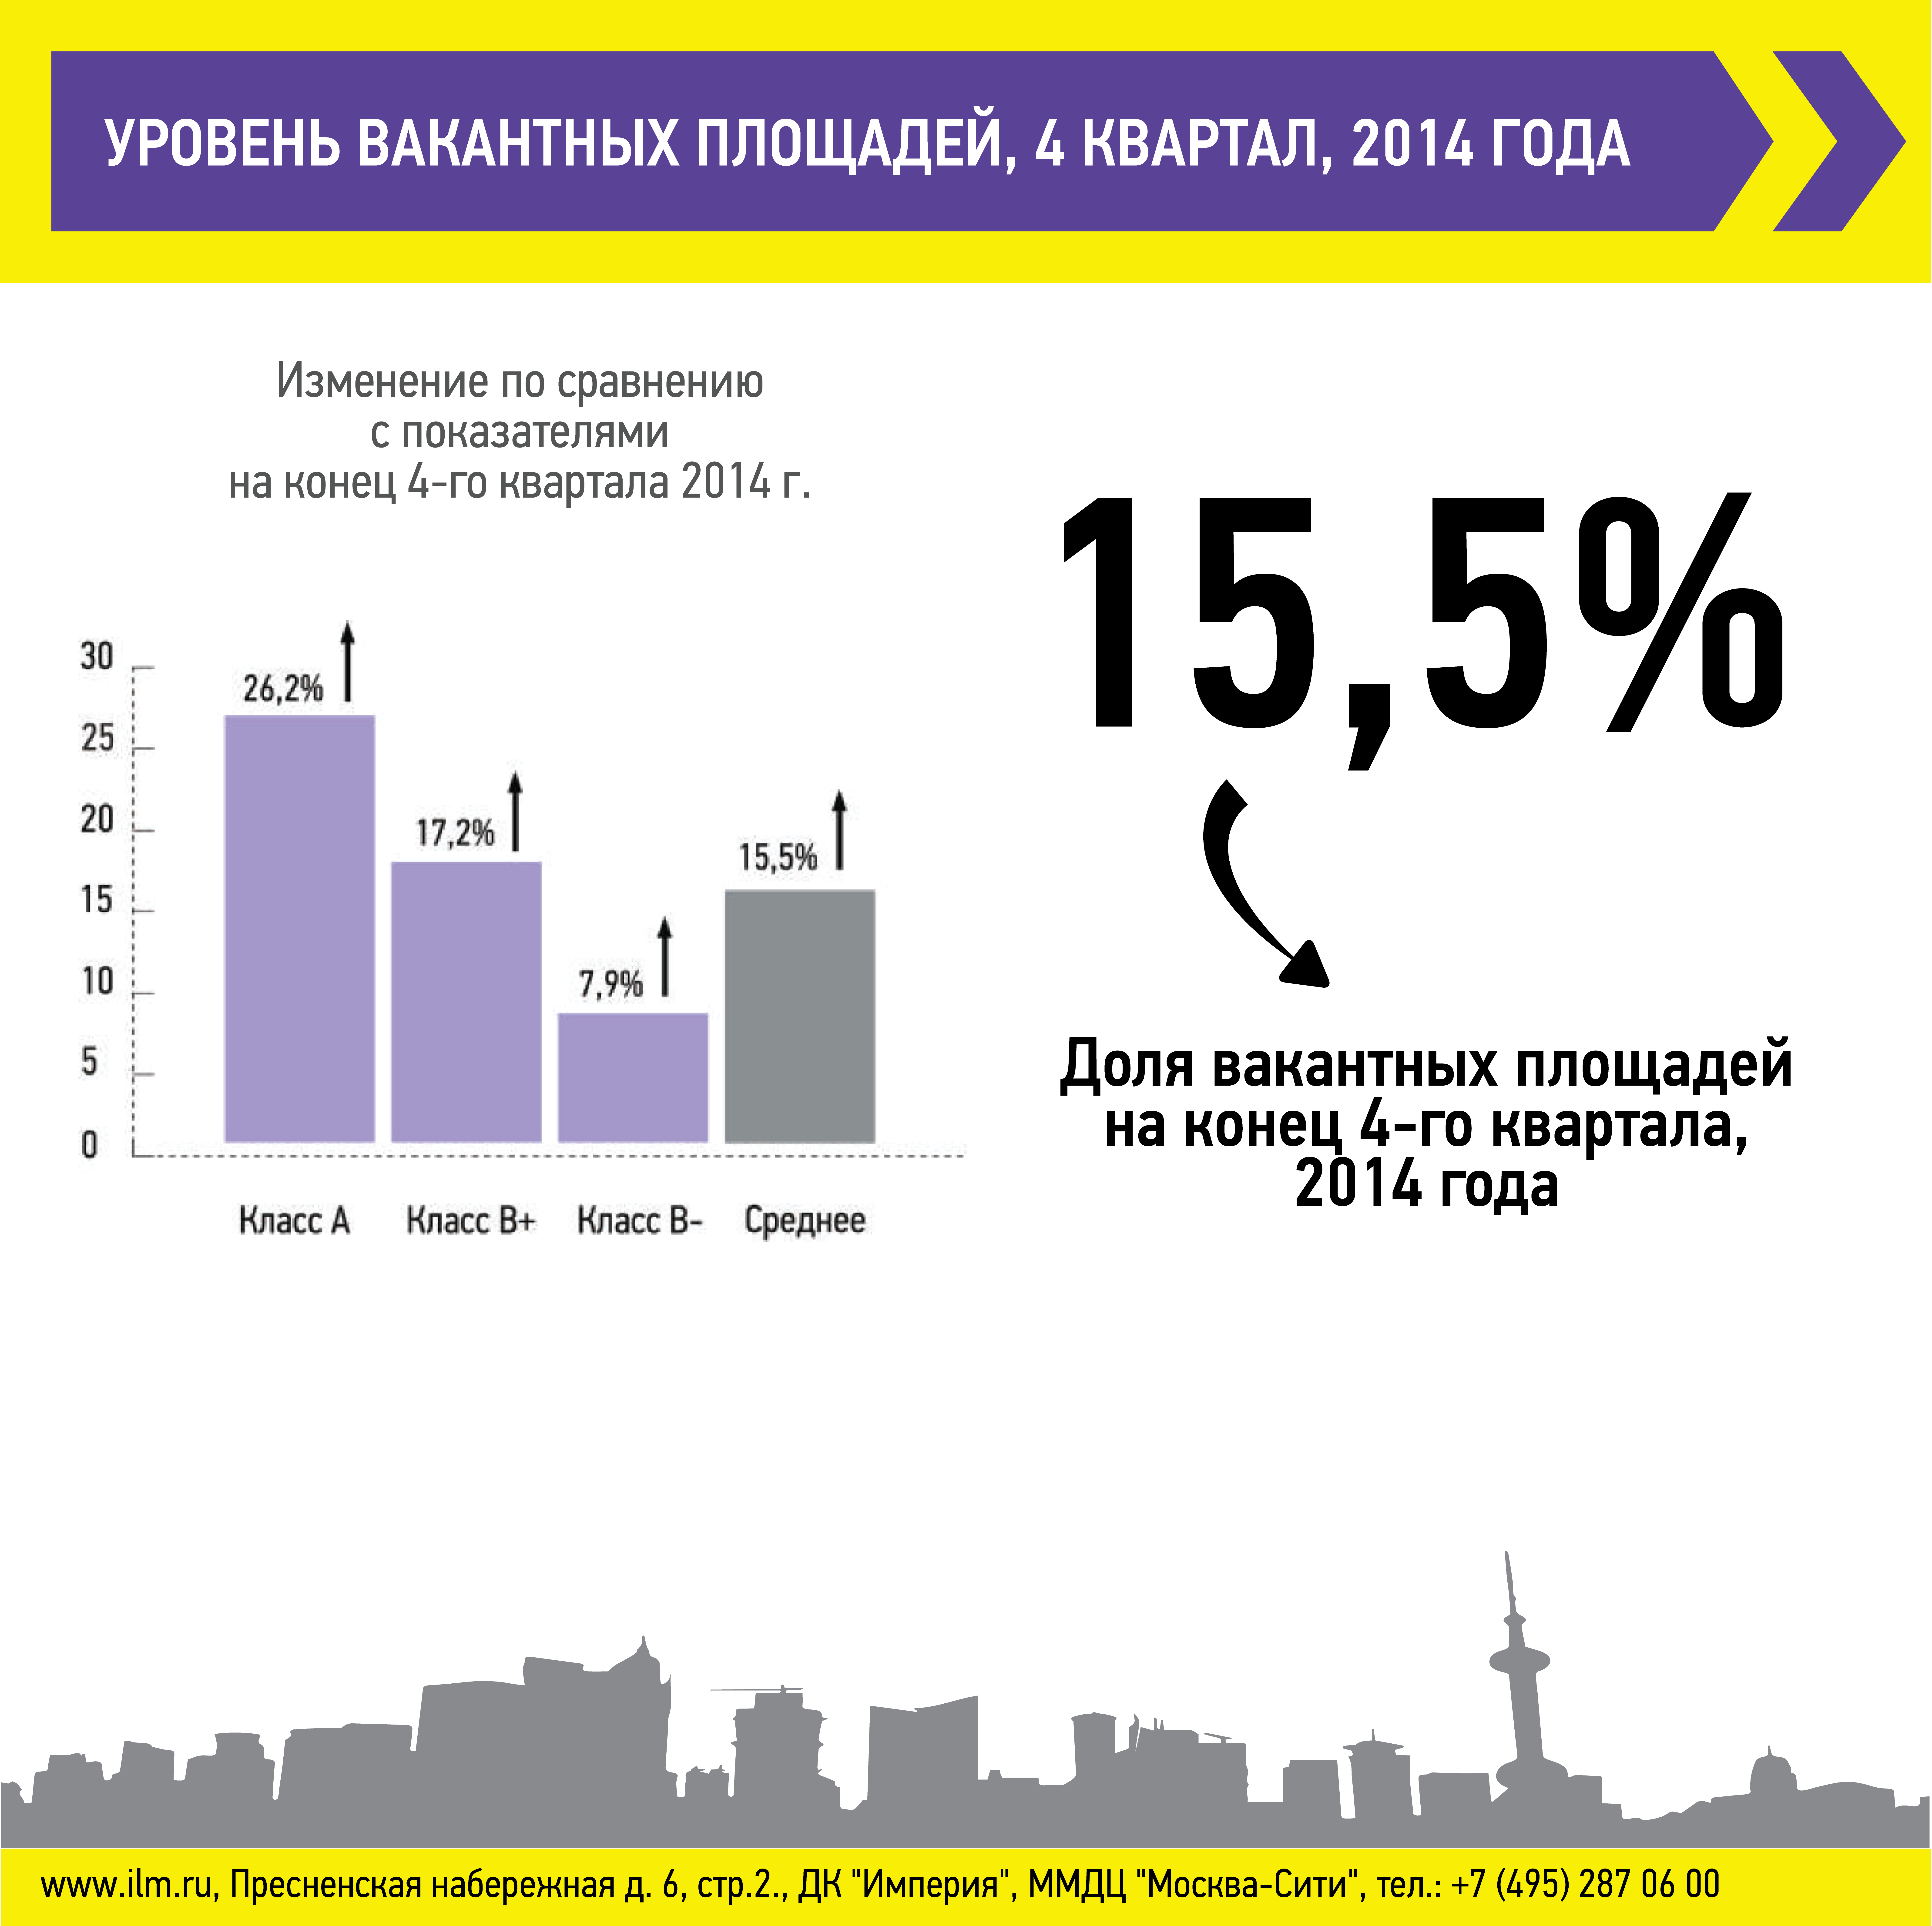 Vacancy rates as of the end of Q4 2014